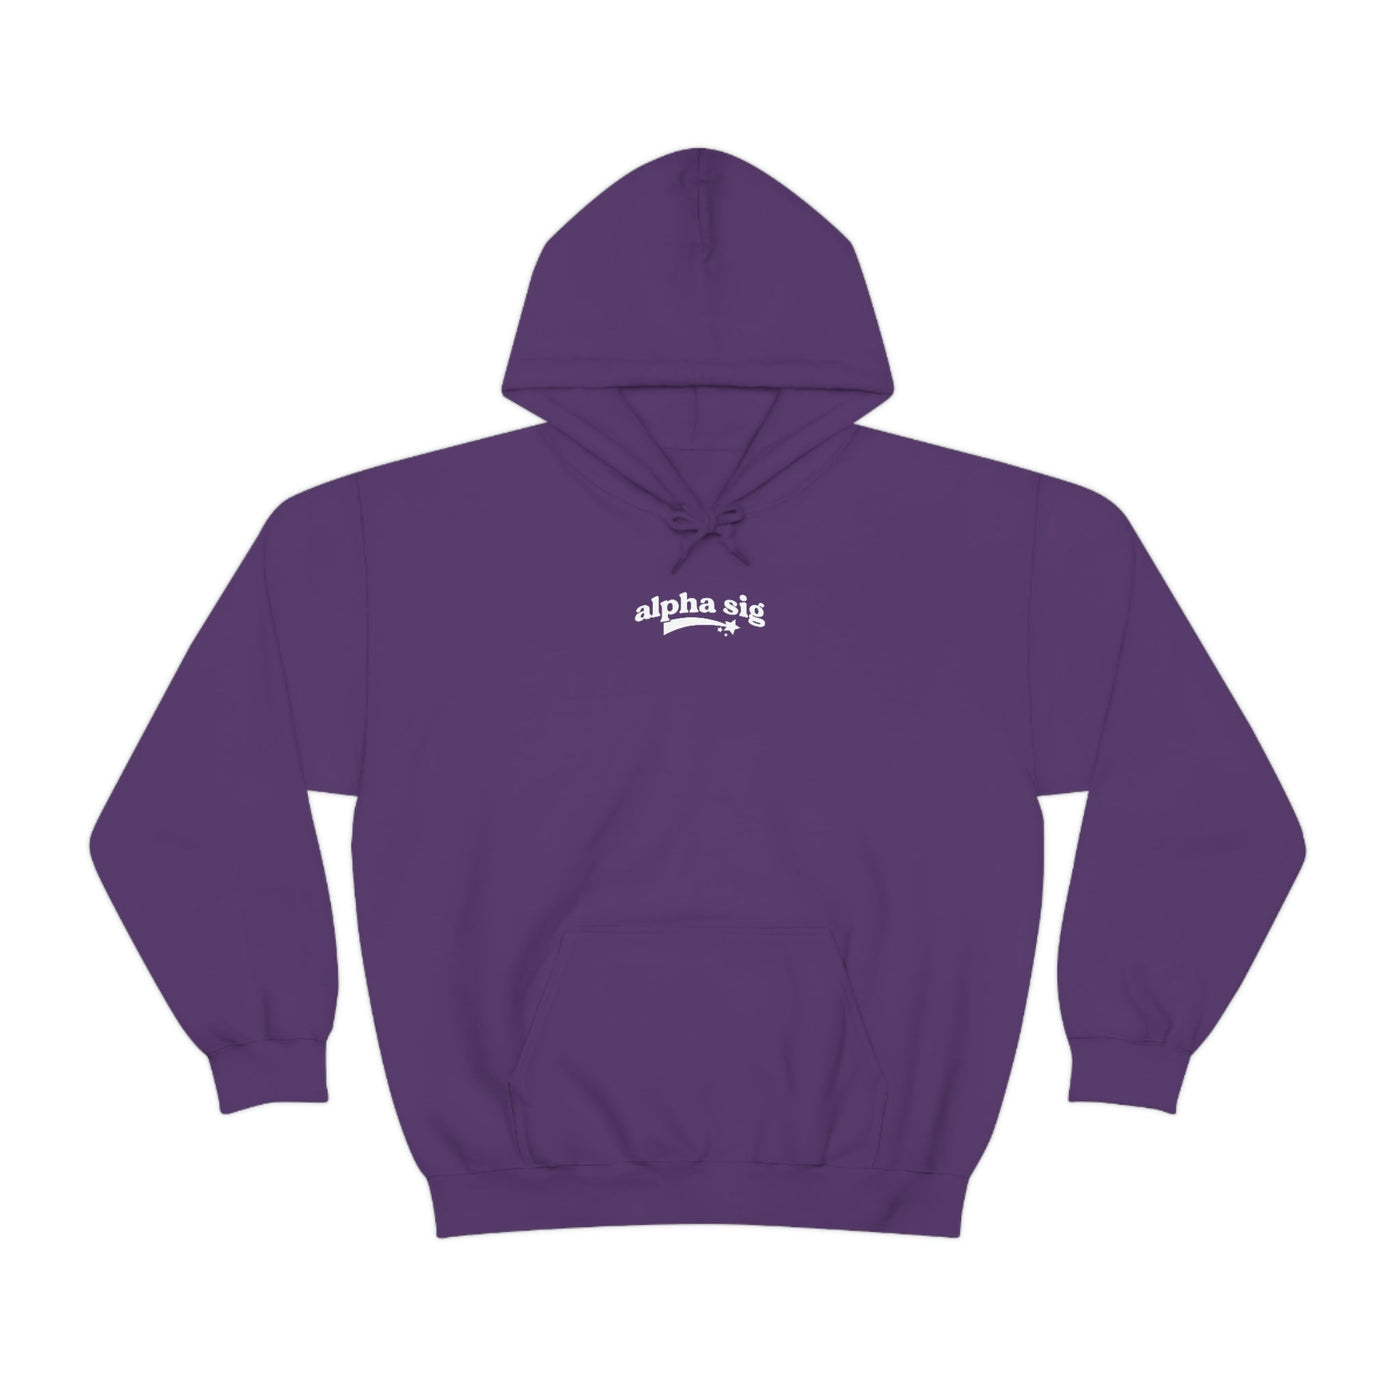 Alpha Sigma Alpha Planet Hoodie | Be Kind to the Planet Trendy Sorority Hoodie